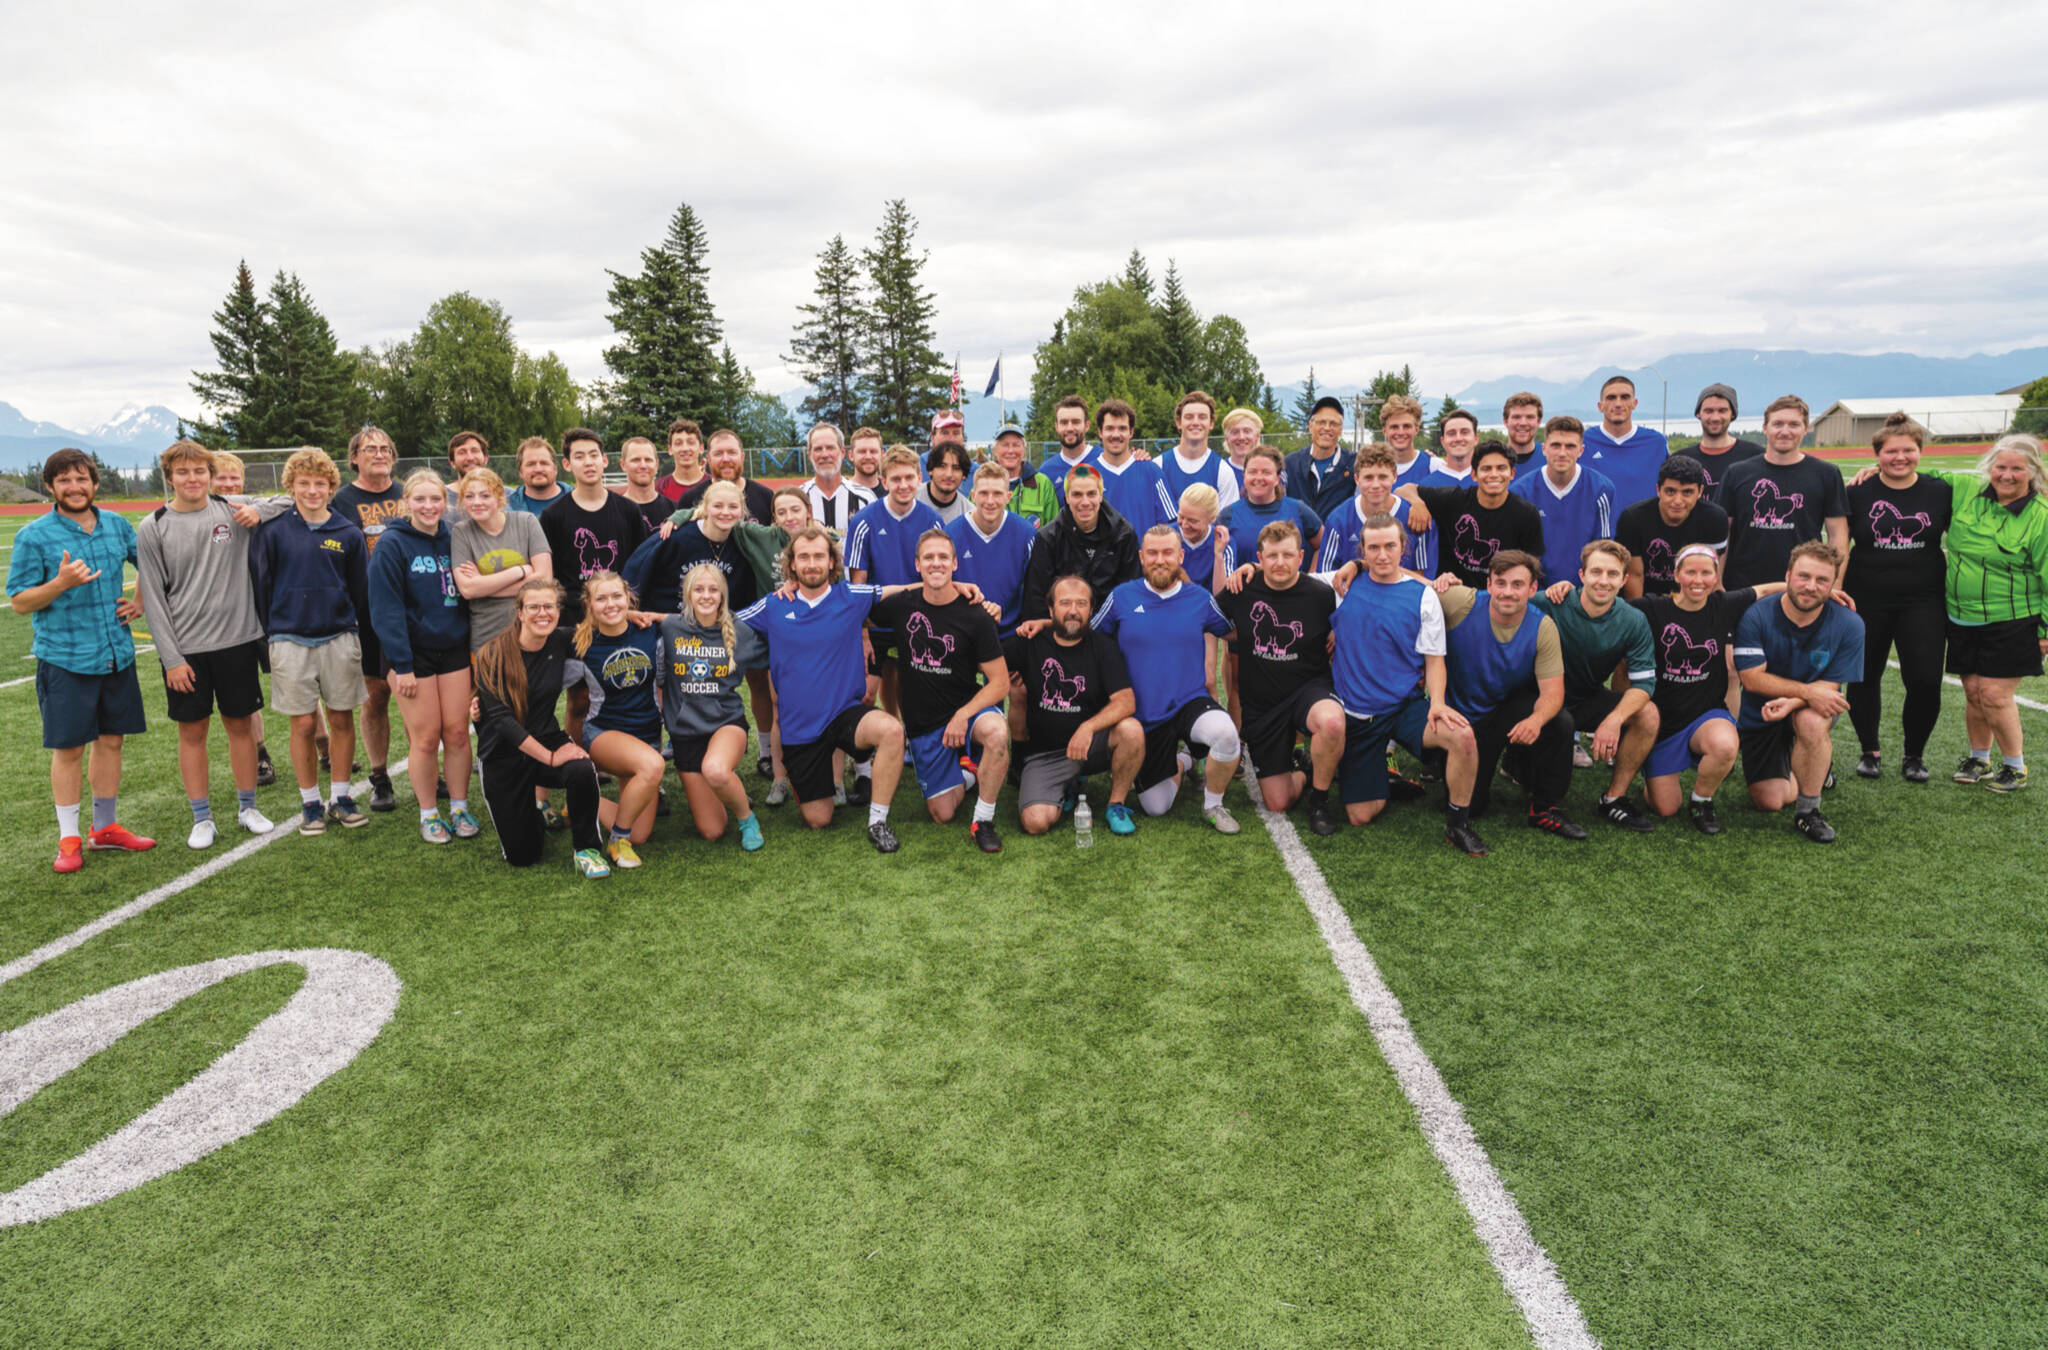 Community soccer players after a special match celebrating the life of Drew Brown at Homer High School Field on Sunday, Aug. 14, 2022. (Photo by Uliana Reutov)